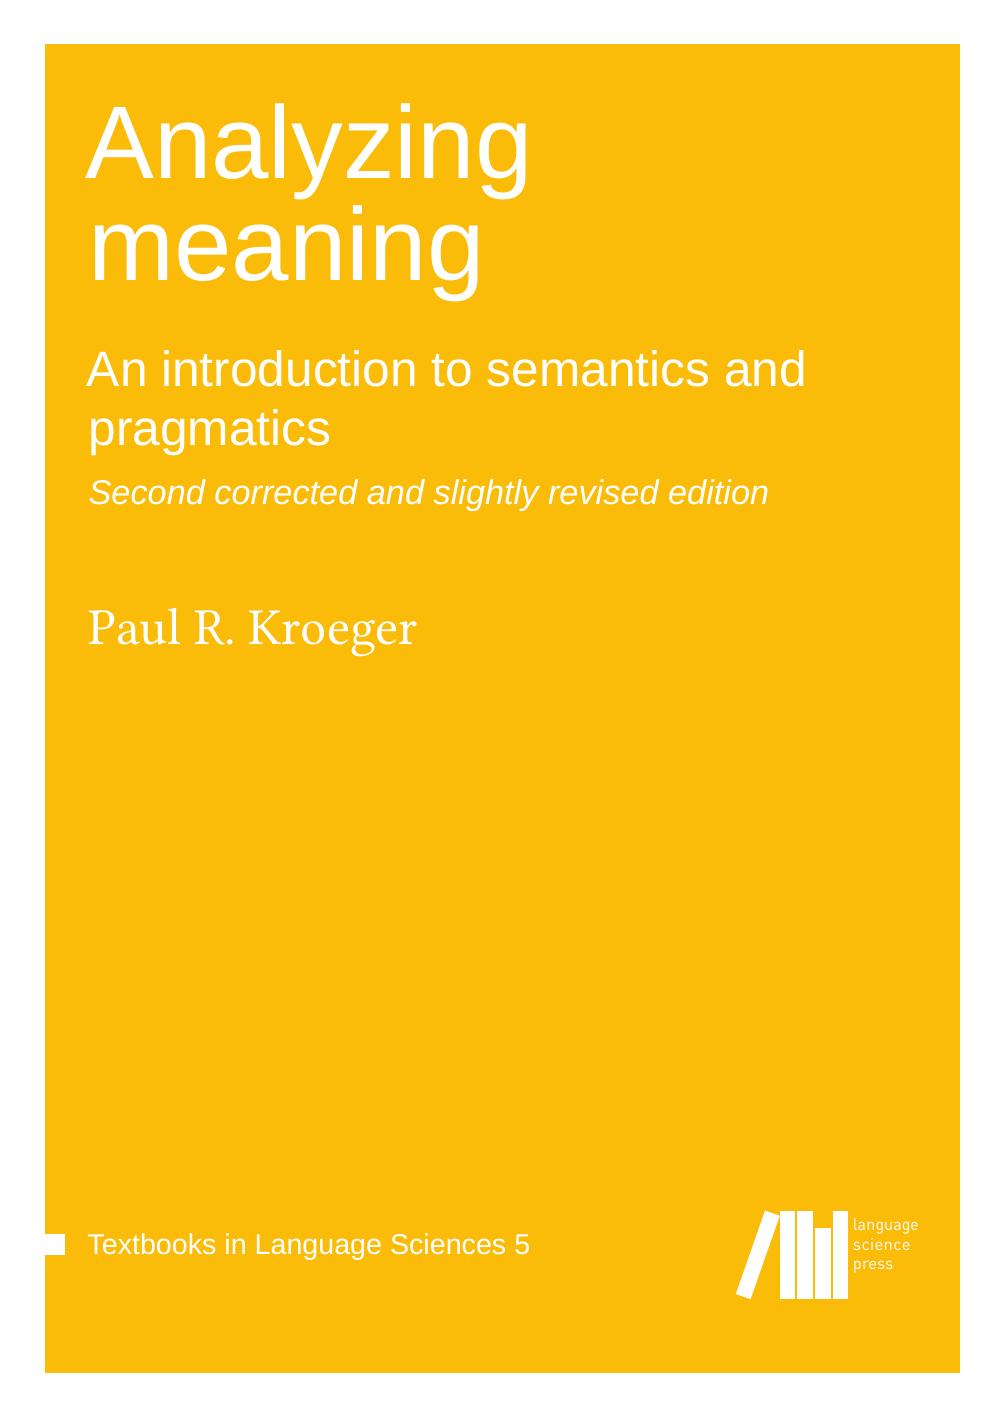 Analyzing Meaning: An Introduction to Semantics and Pragmatics